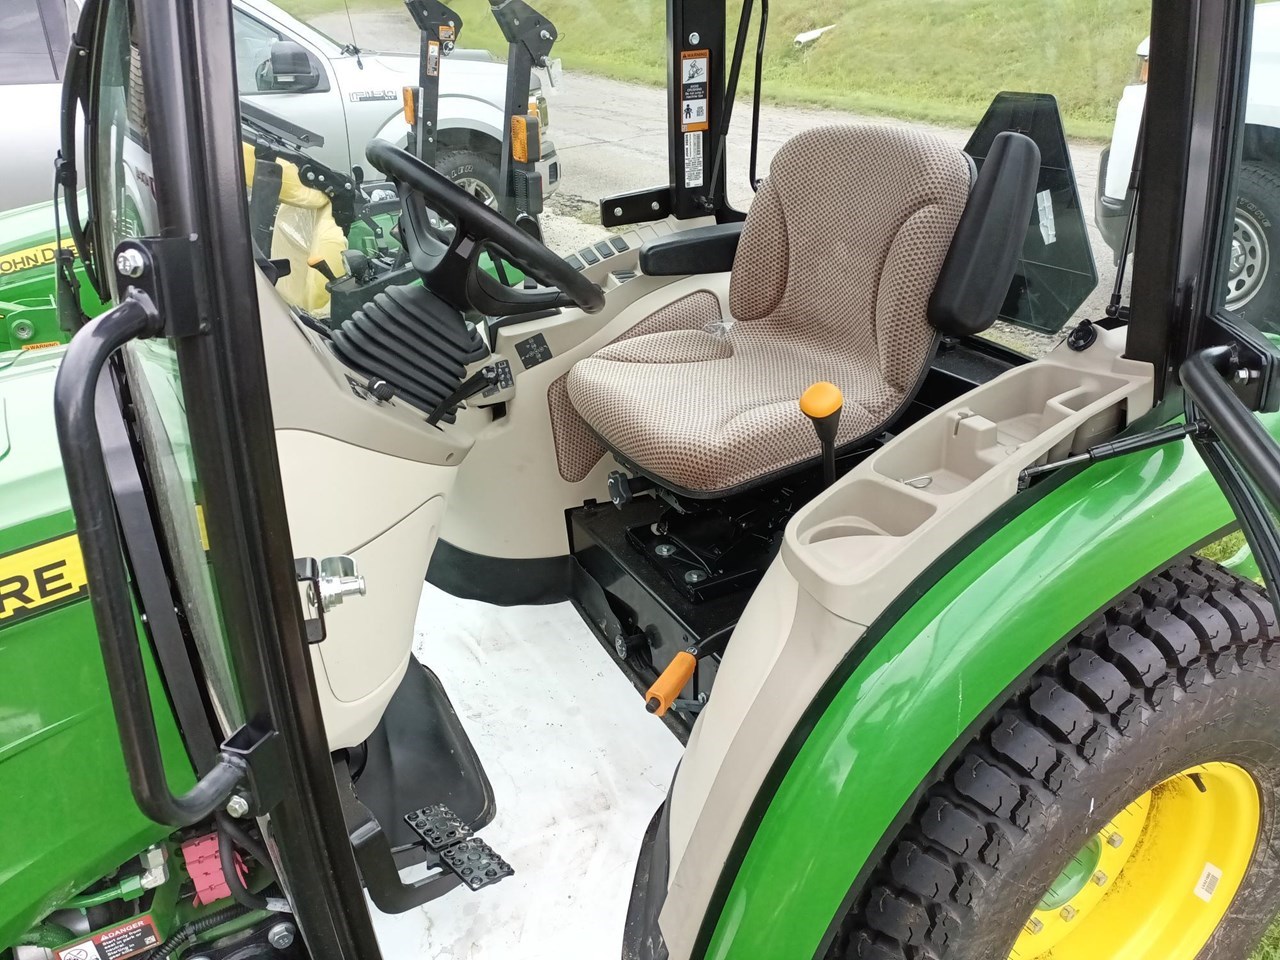 2022 John Deere 3033R Tractor - Compact Utility For Sale